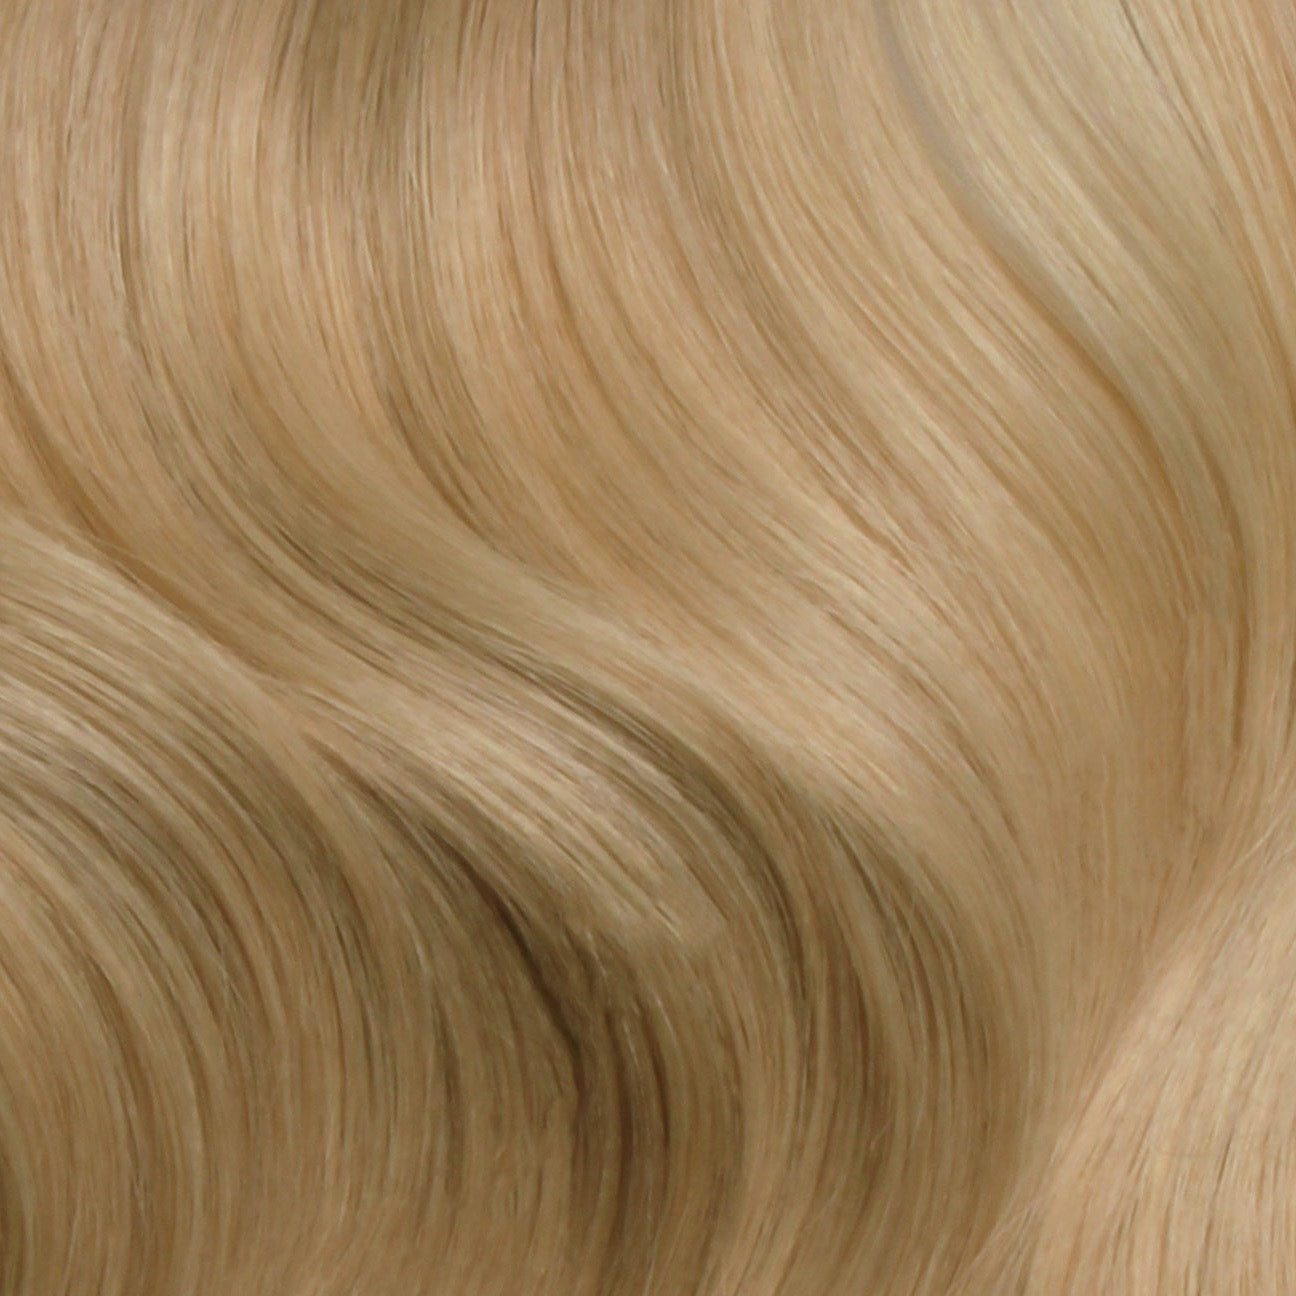 Nano Bonds 20 Inches - SWAY Hair Extensions Beach-Blonde-18-22 Ultra-fine, invisible bonds for a flawless, natural look. 100% Remy Human hair, lightweight and versatile. Reusable and perfect for individual or salon use.